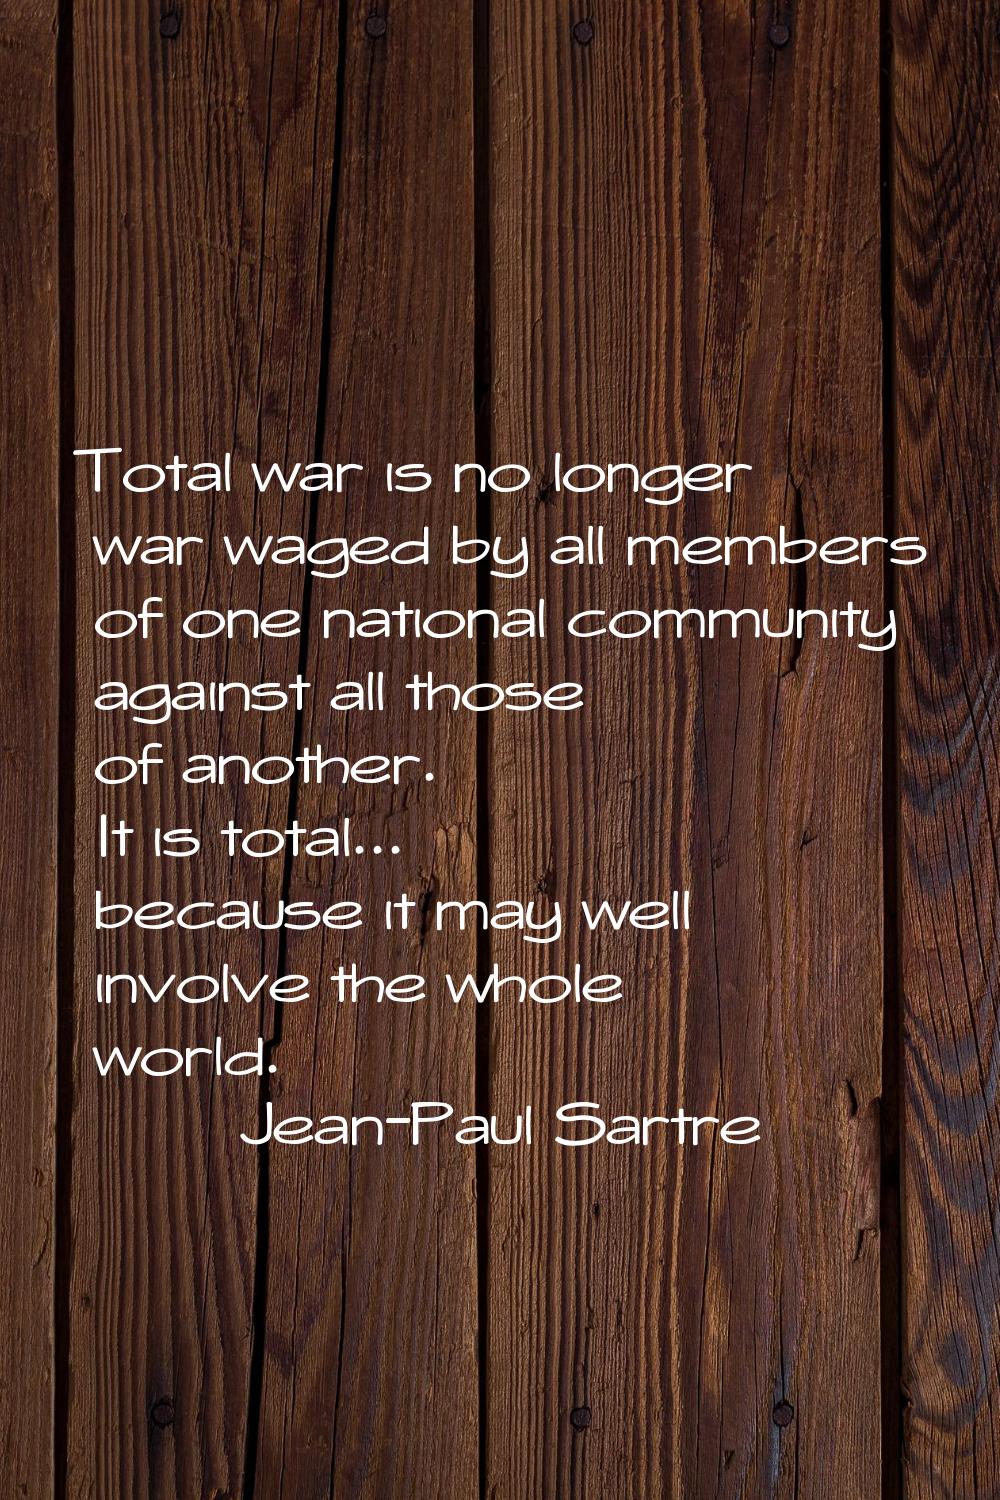 Total war is no longer war waged by all members of one national community against all those of anot